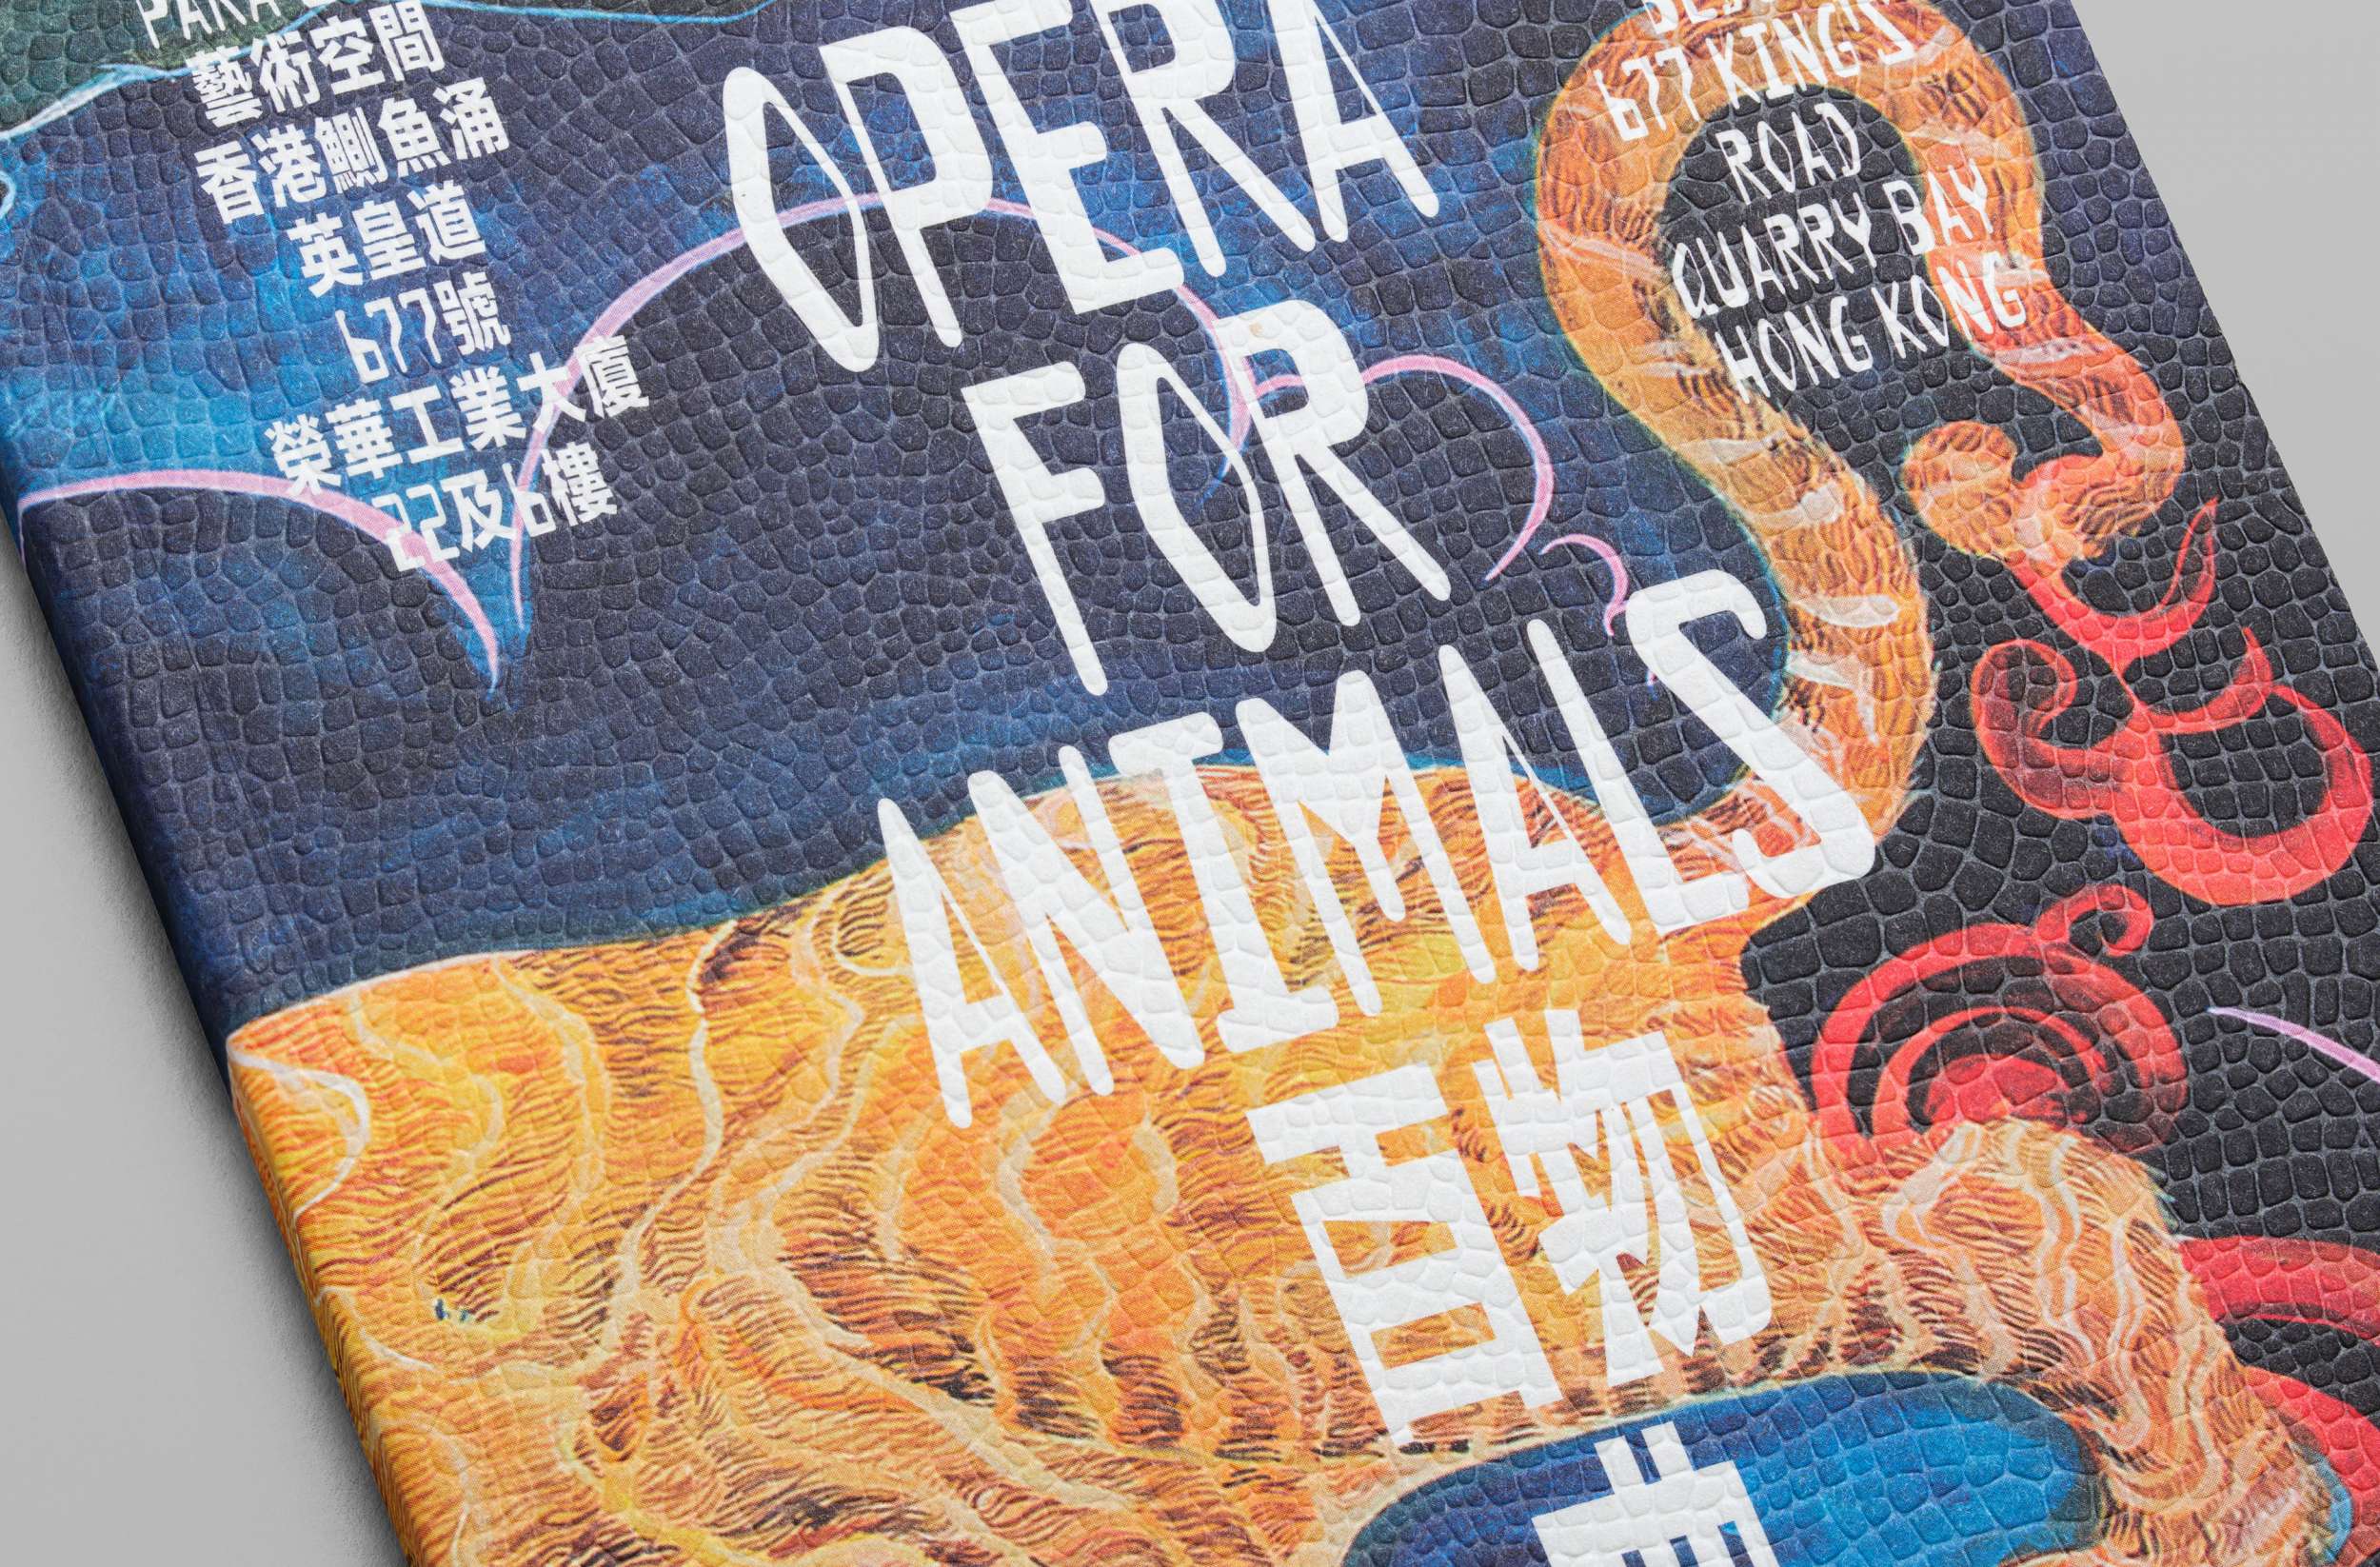 An Opera for Animals